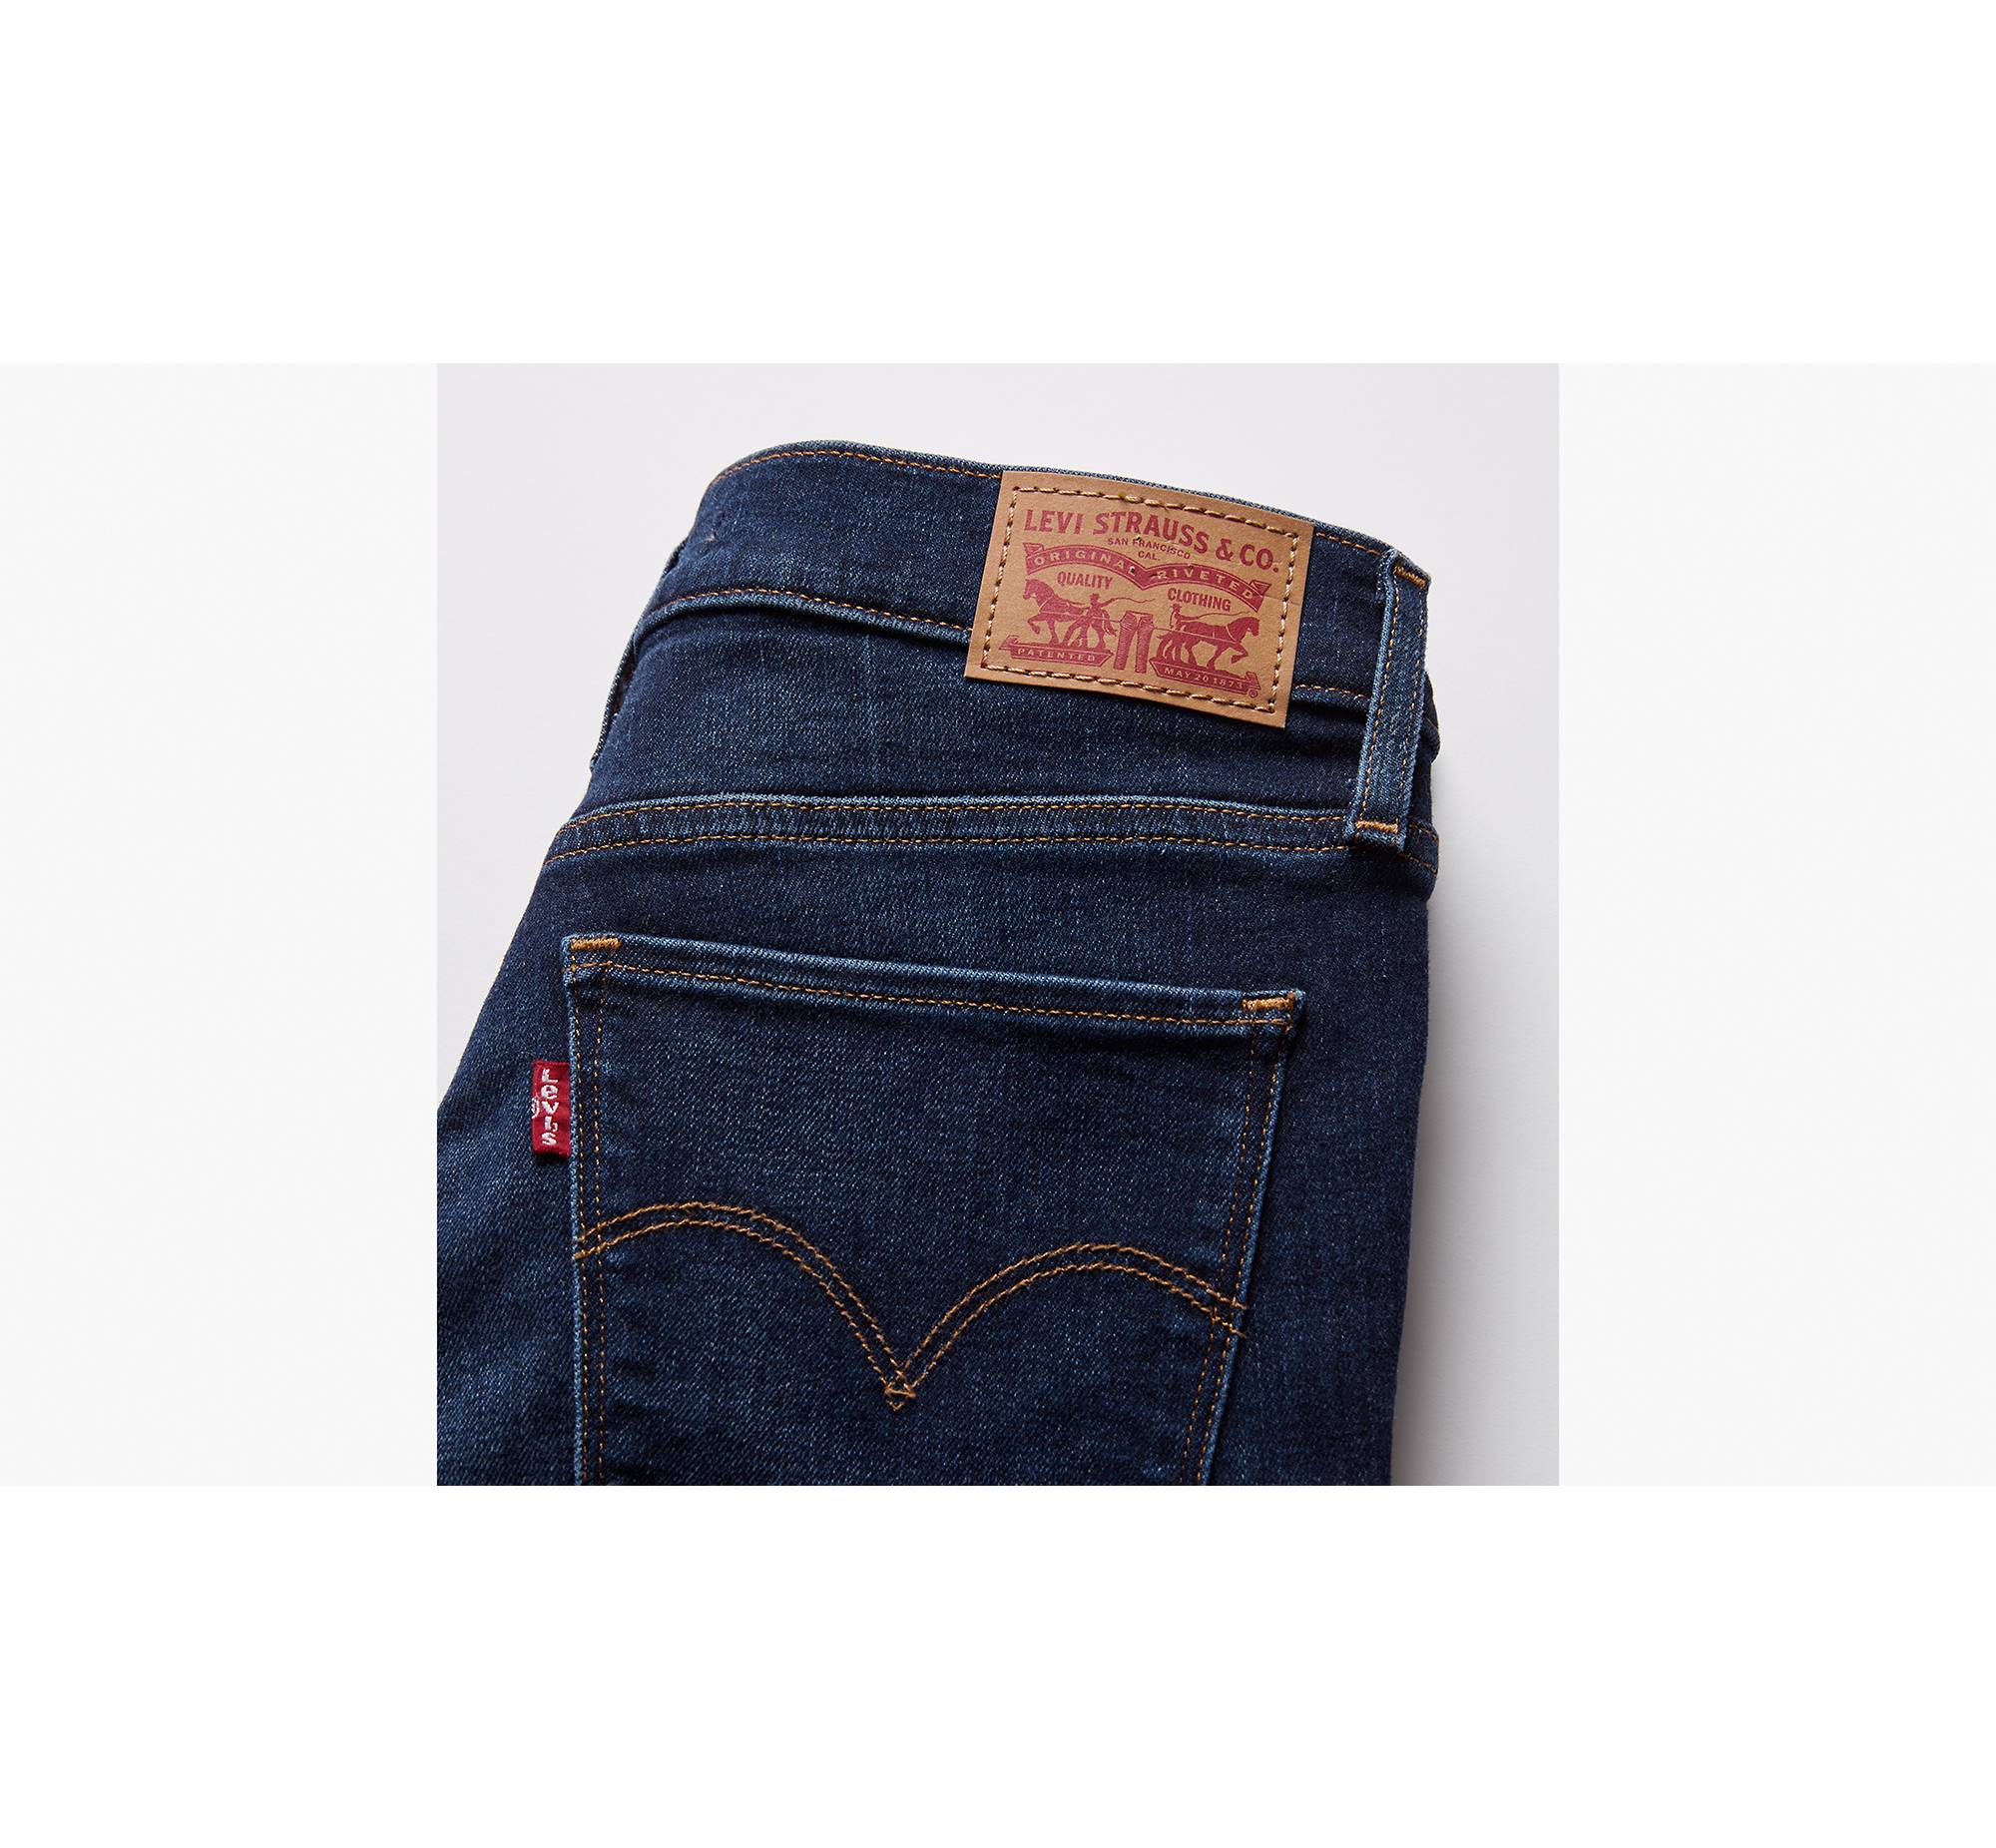 The Story Behind the Official Fifth Pocket - Levi Strauss & Co